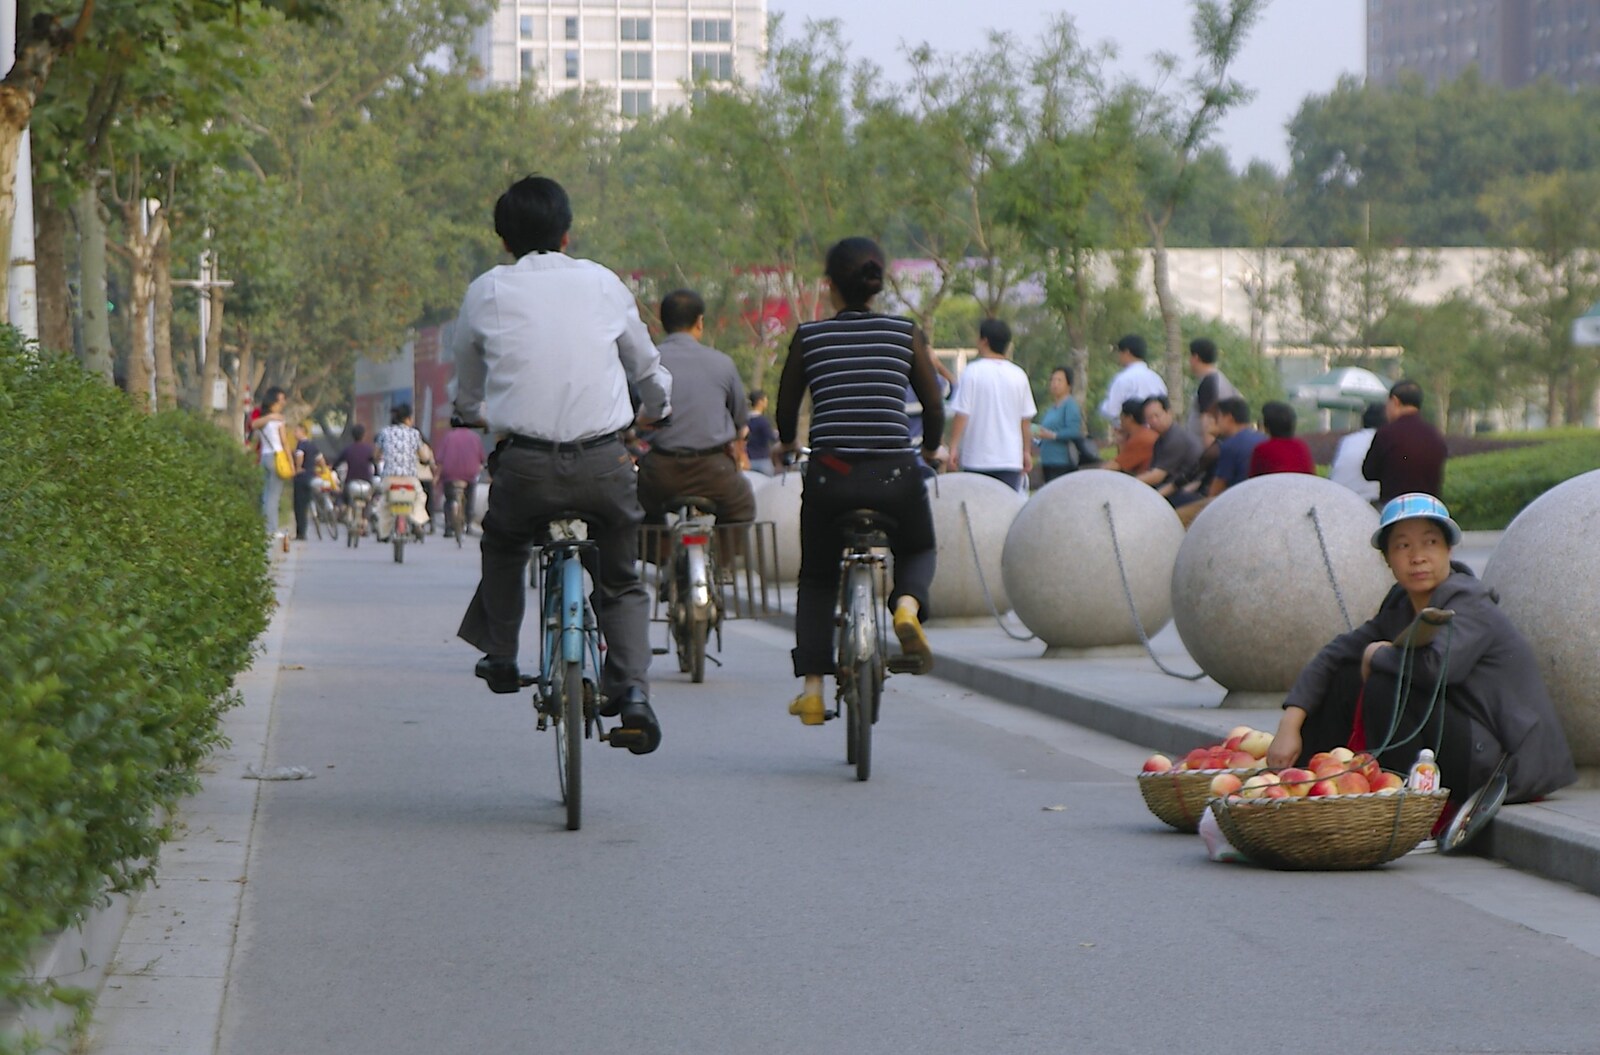 A woman tries to sell fruit as cyclists pass by from A Few Days in Nanjing, Jiangsu Province, China - 7th October 2006